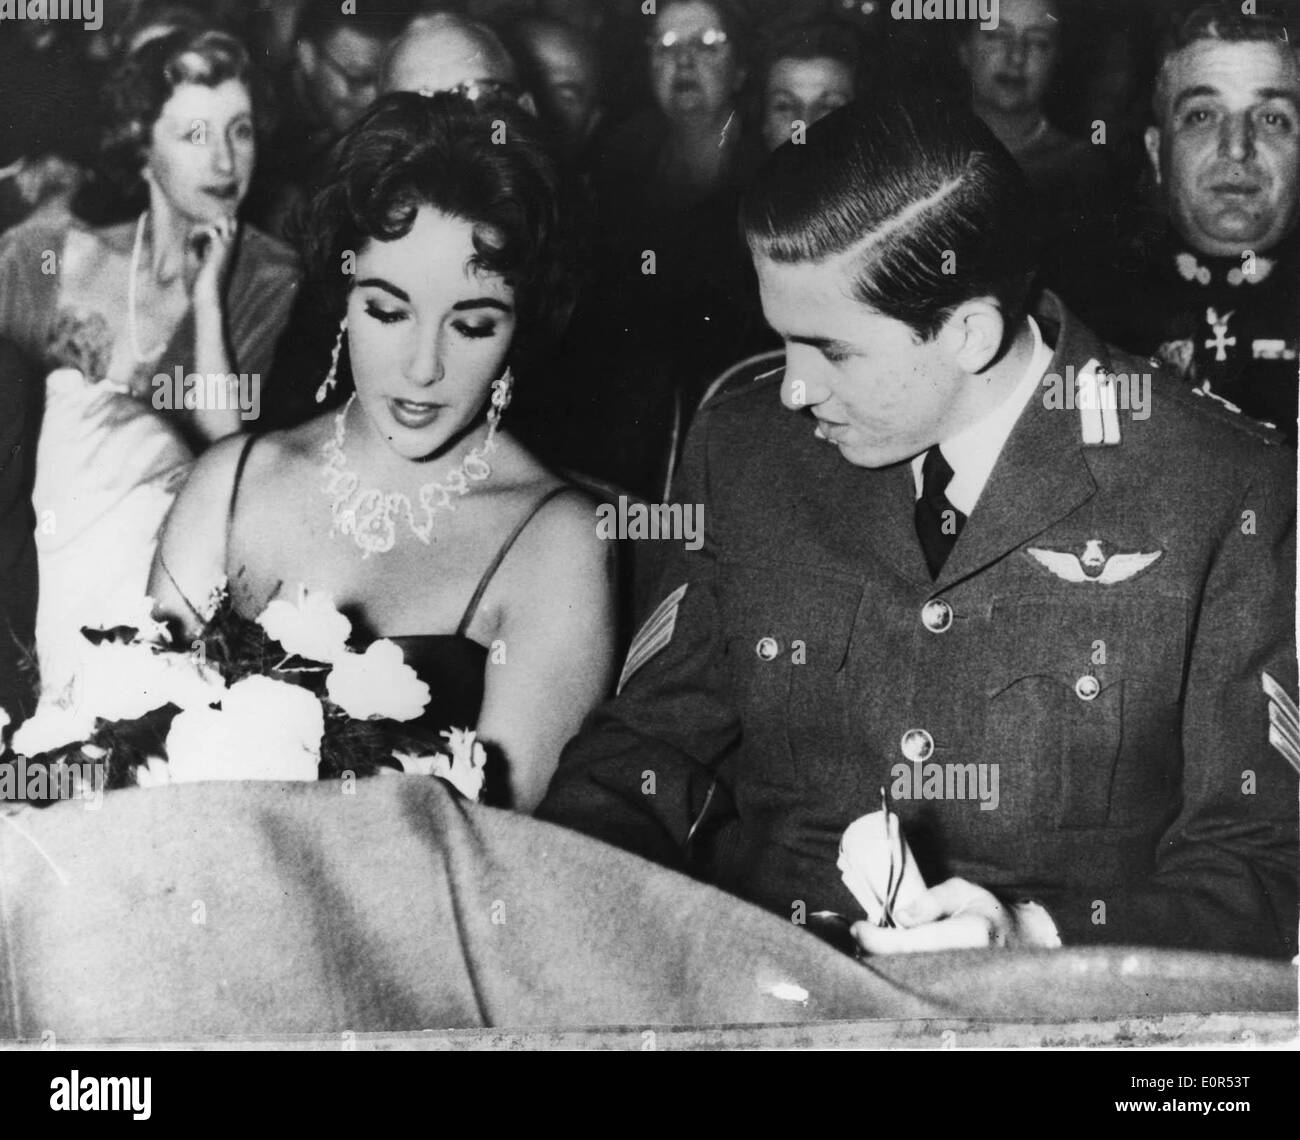 Feb. 5, 1958 - Athens, Greece - Academy Award winning actress ELIZABETH 'LIZ' TAYLOR is in Athens with husband Mike Todd for the 'Round the World in 80 Days' premiere. PICTURED: Liz Taylor chats with PRINCE CONSTANTINE II of Greece at the Radio City Theatre. Stock Photo